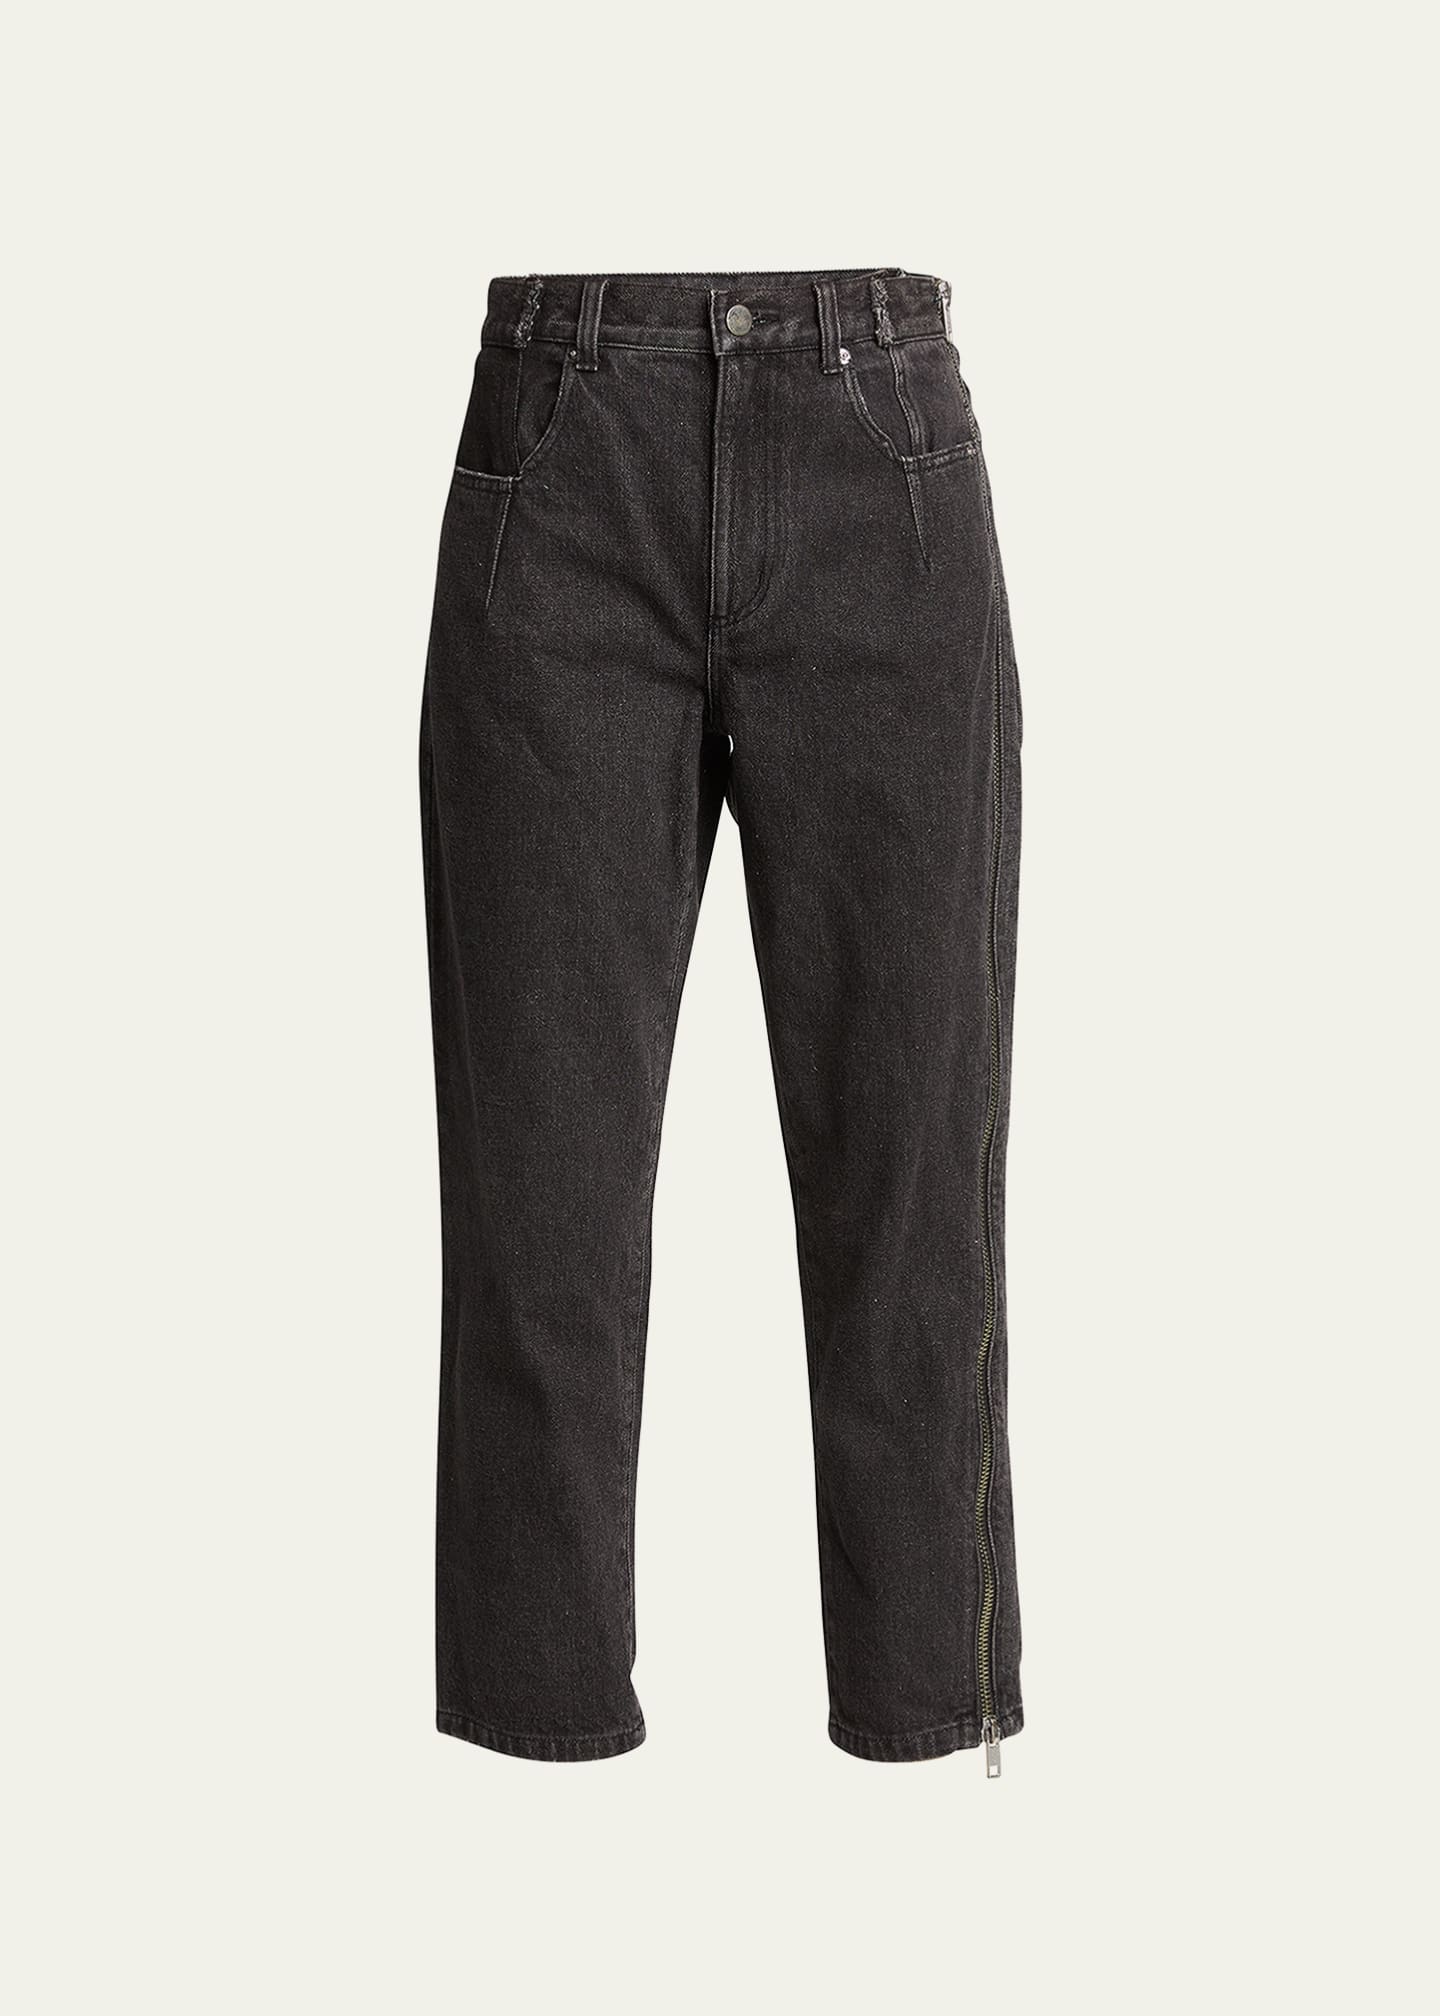 Riot Pastor Equipment 3.1 Phillip Lim Straight-Leg Cropped Jeans with Side Zipper Detail -  Bergdorf Goodman